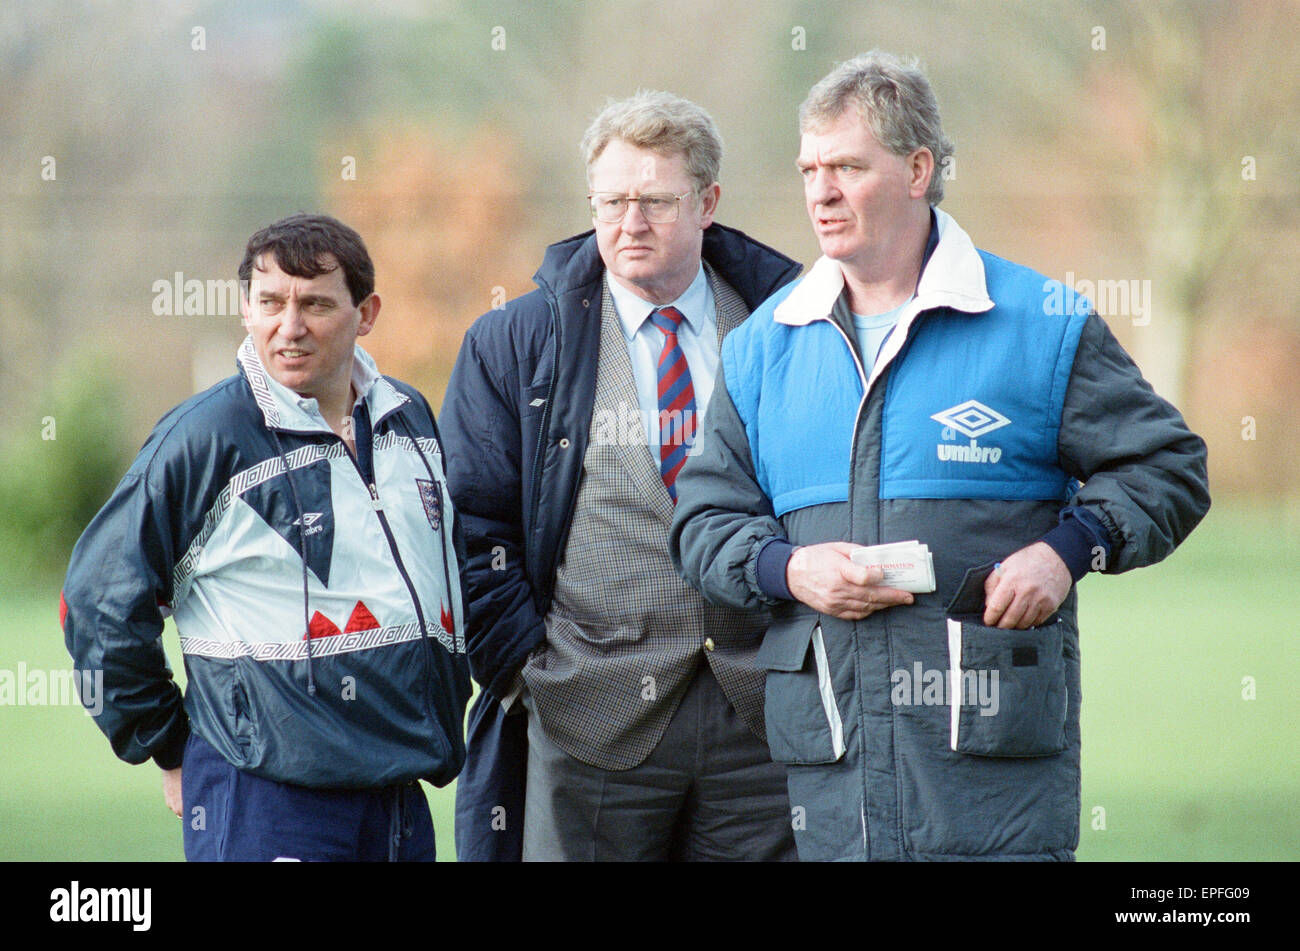 England Football Team, 17th February 1992. Photocall - Graham Taylor England Manager, Graham Kelly Chief Executive of the Football Association (1989 to 1998) & Lawrie McMenemy England Assistant Manager. Stock Photo